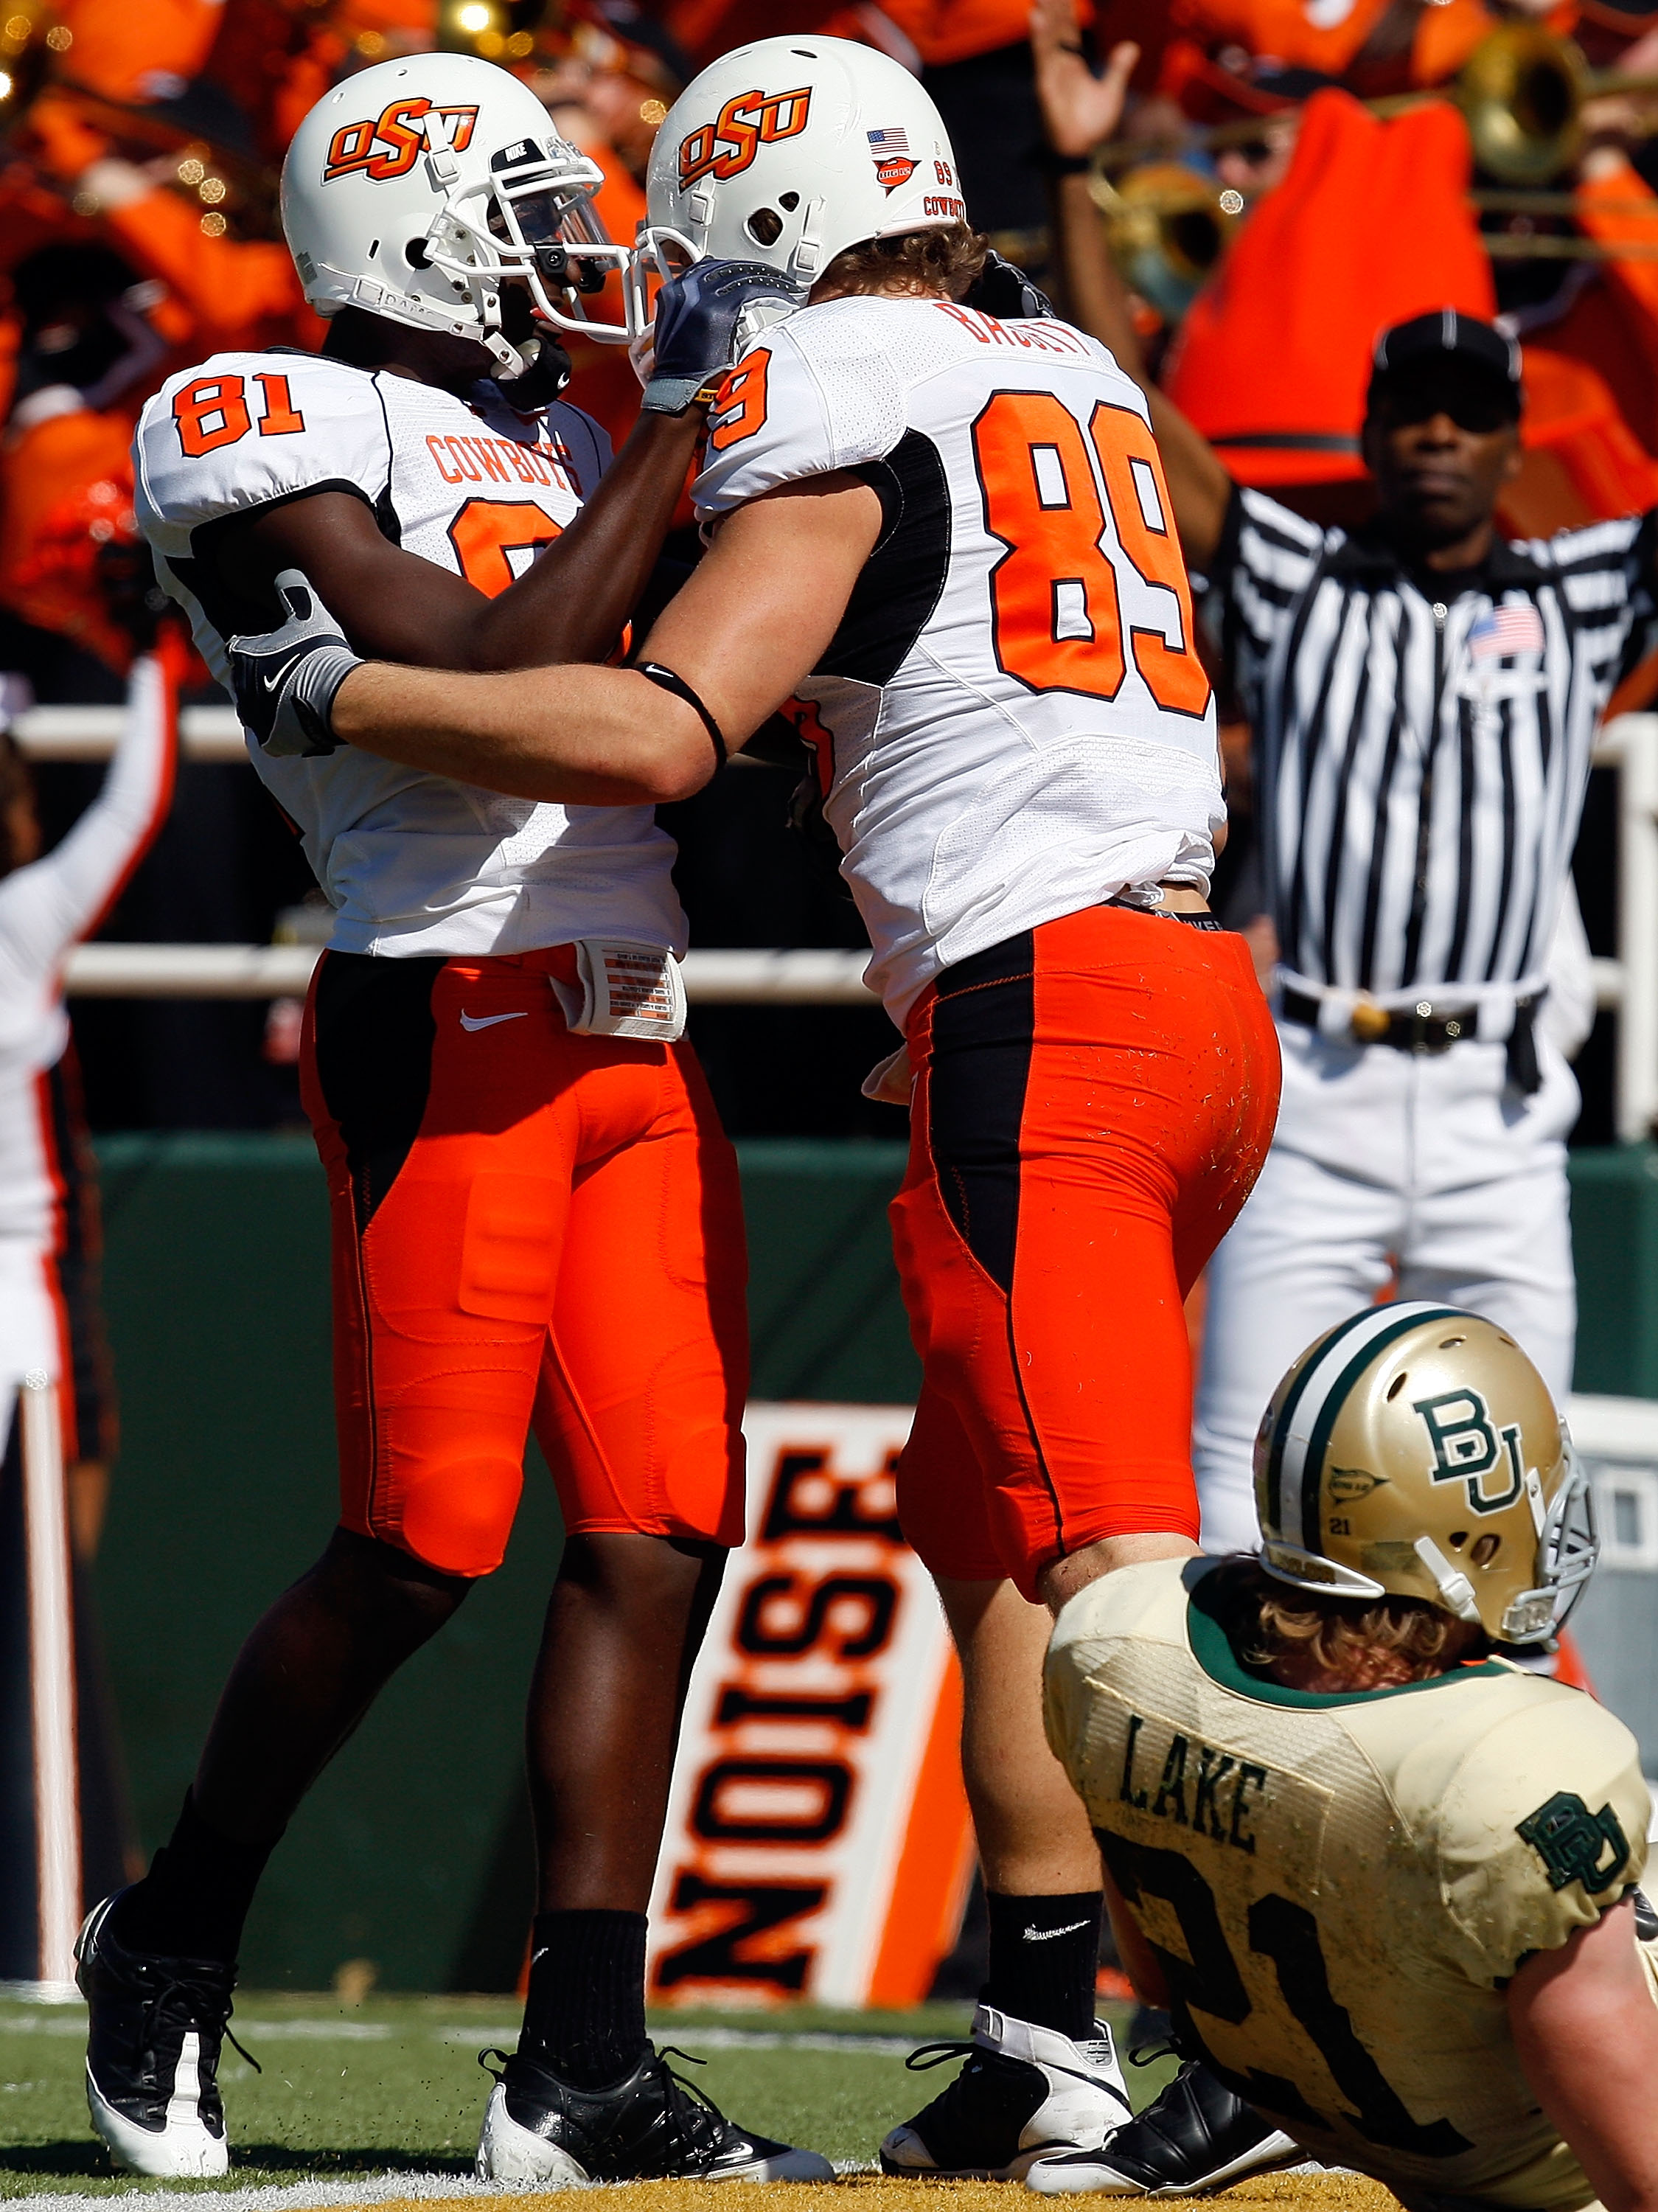 WACO, TX - OCTOBER 24:  Justin Blackmon #81 and Cooper Nicholas #89 of the Oklahoma State Cowboys celebrate a touchdown in front of Jordan Lake #21 of the Baylor Bears at Floyd Casey Stadium on October 24, 2009 in Waco, Texas.  (Photo by Ronald Martinez/G